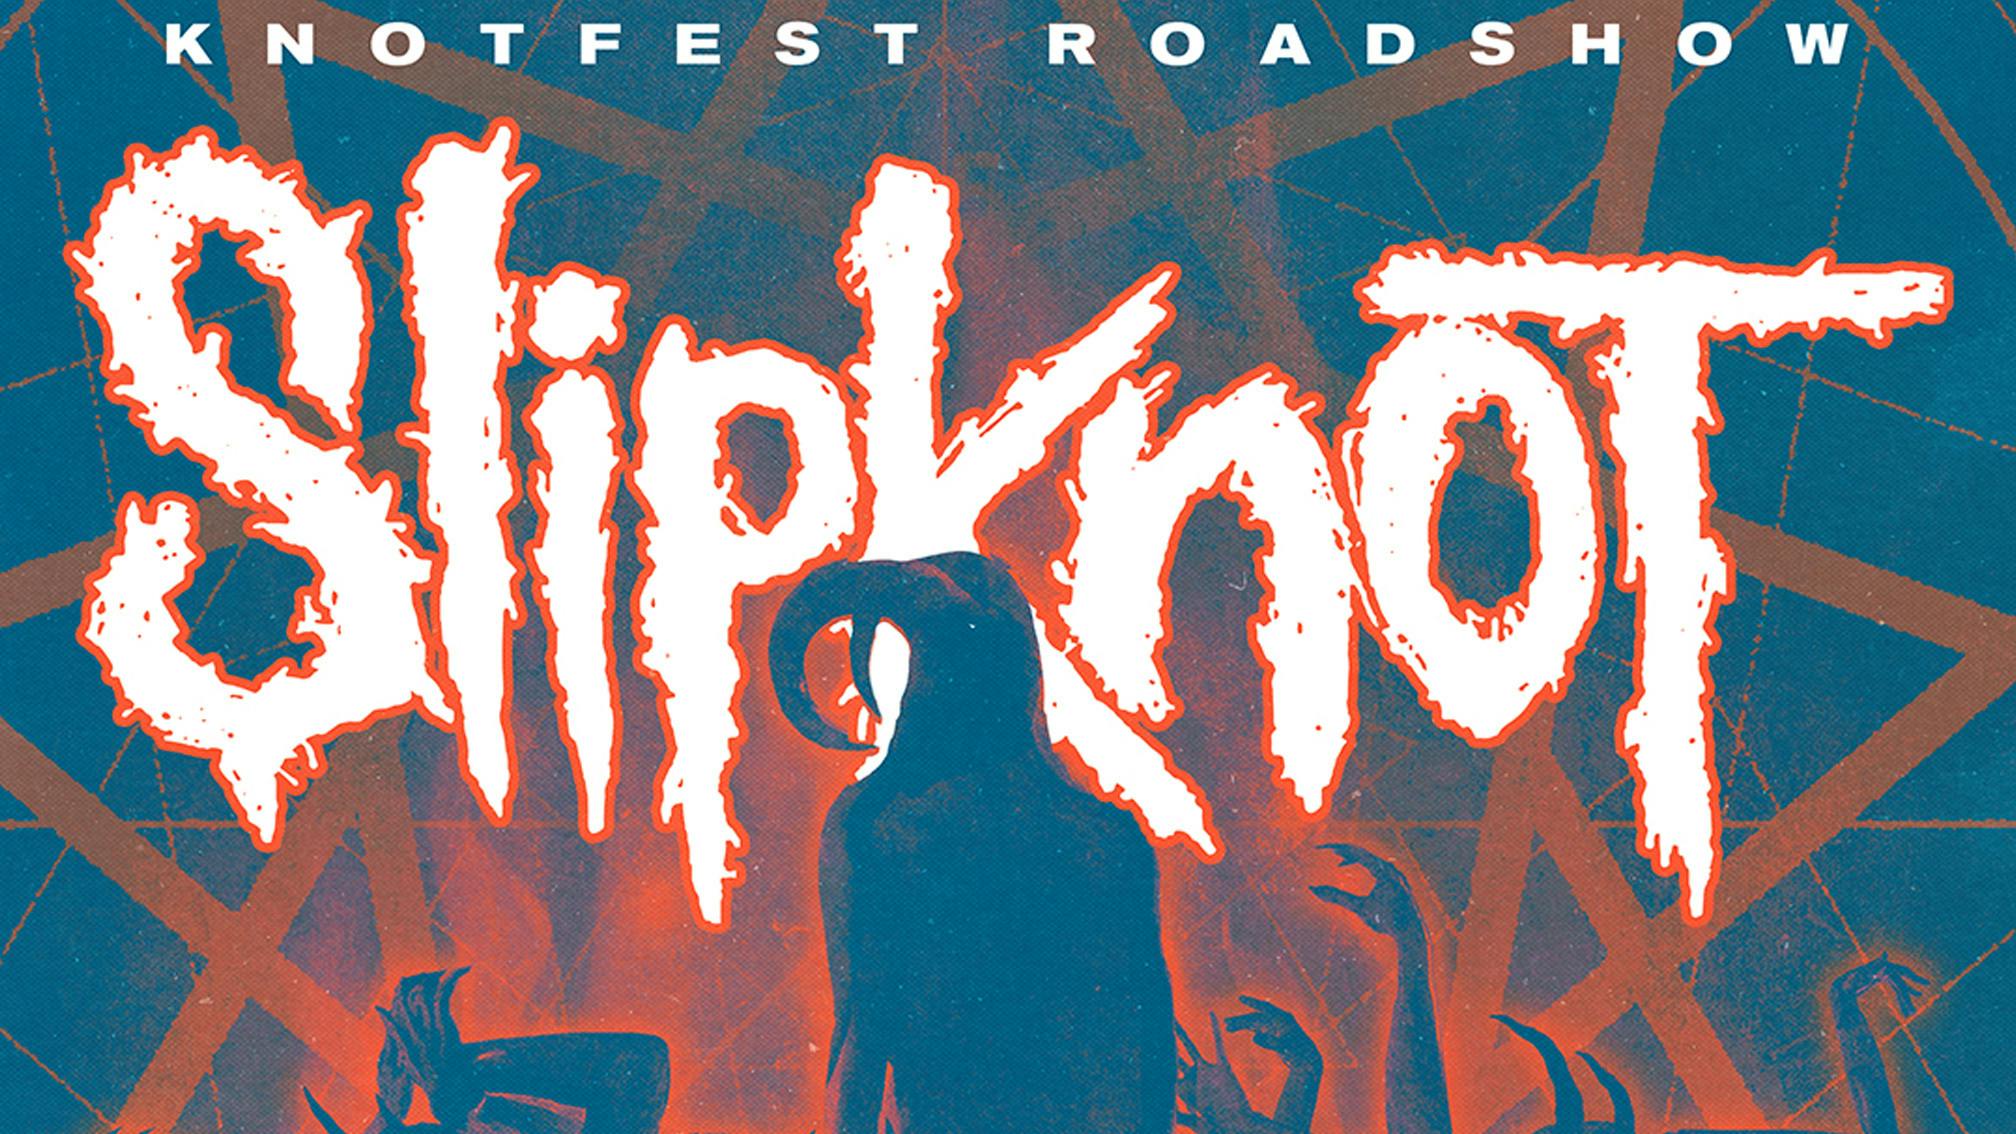 Slipknot announce Knotfest Roadshow 2021 with Killswitch Engage, FEVER 333 and Code Orange